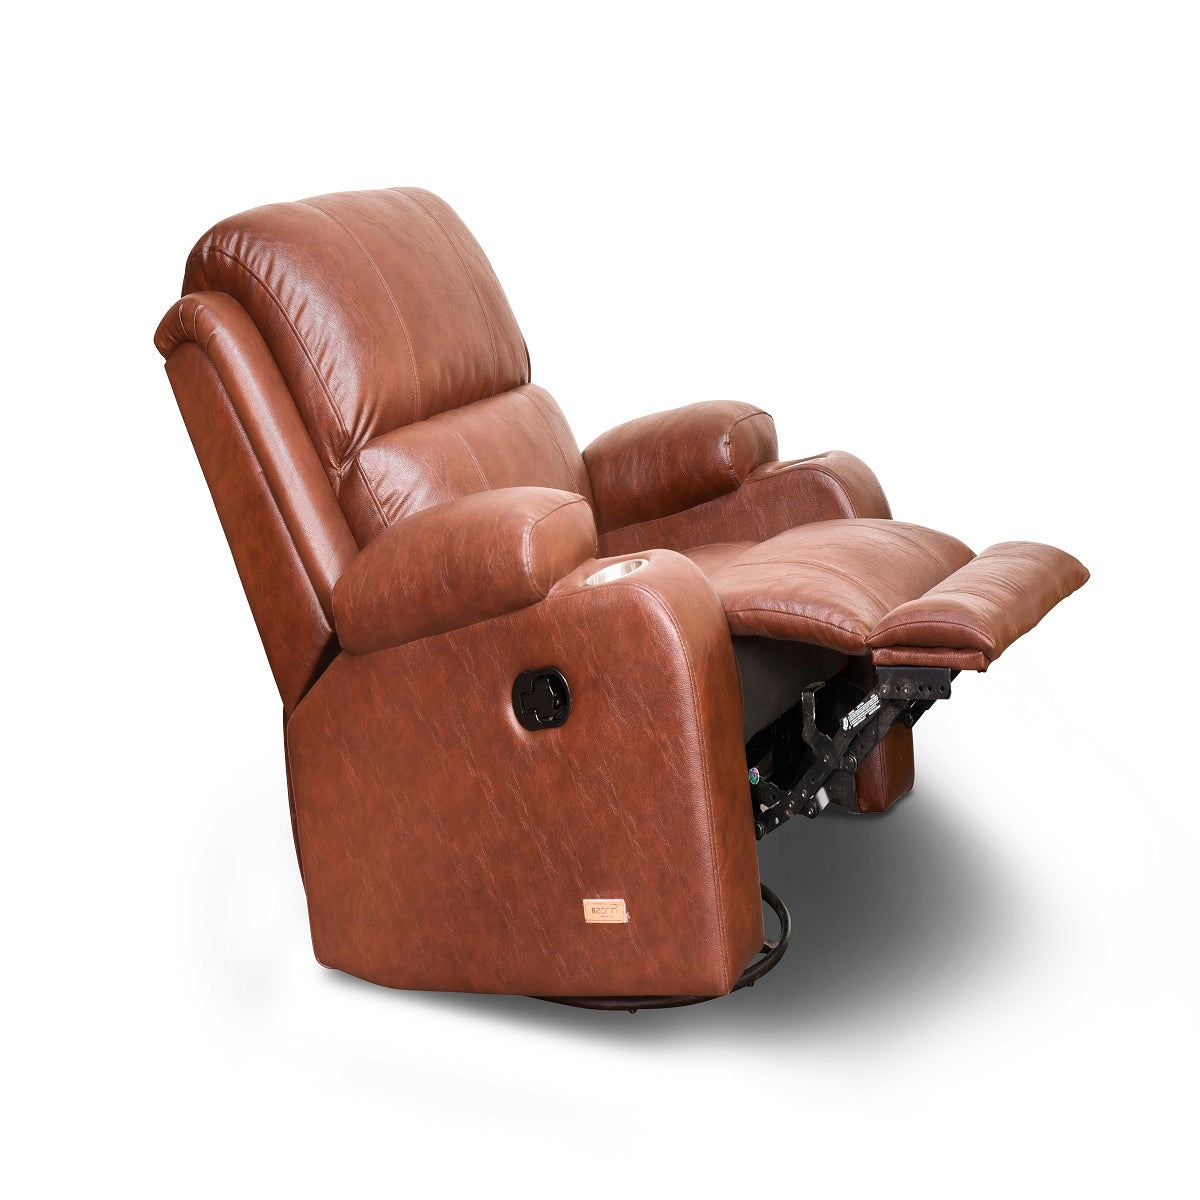 Osaka 1S Recliner by Zorin in Brown Color Zorin